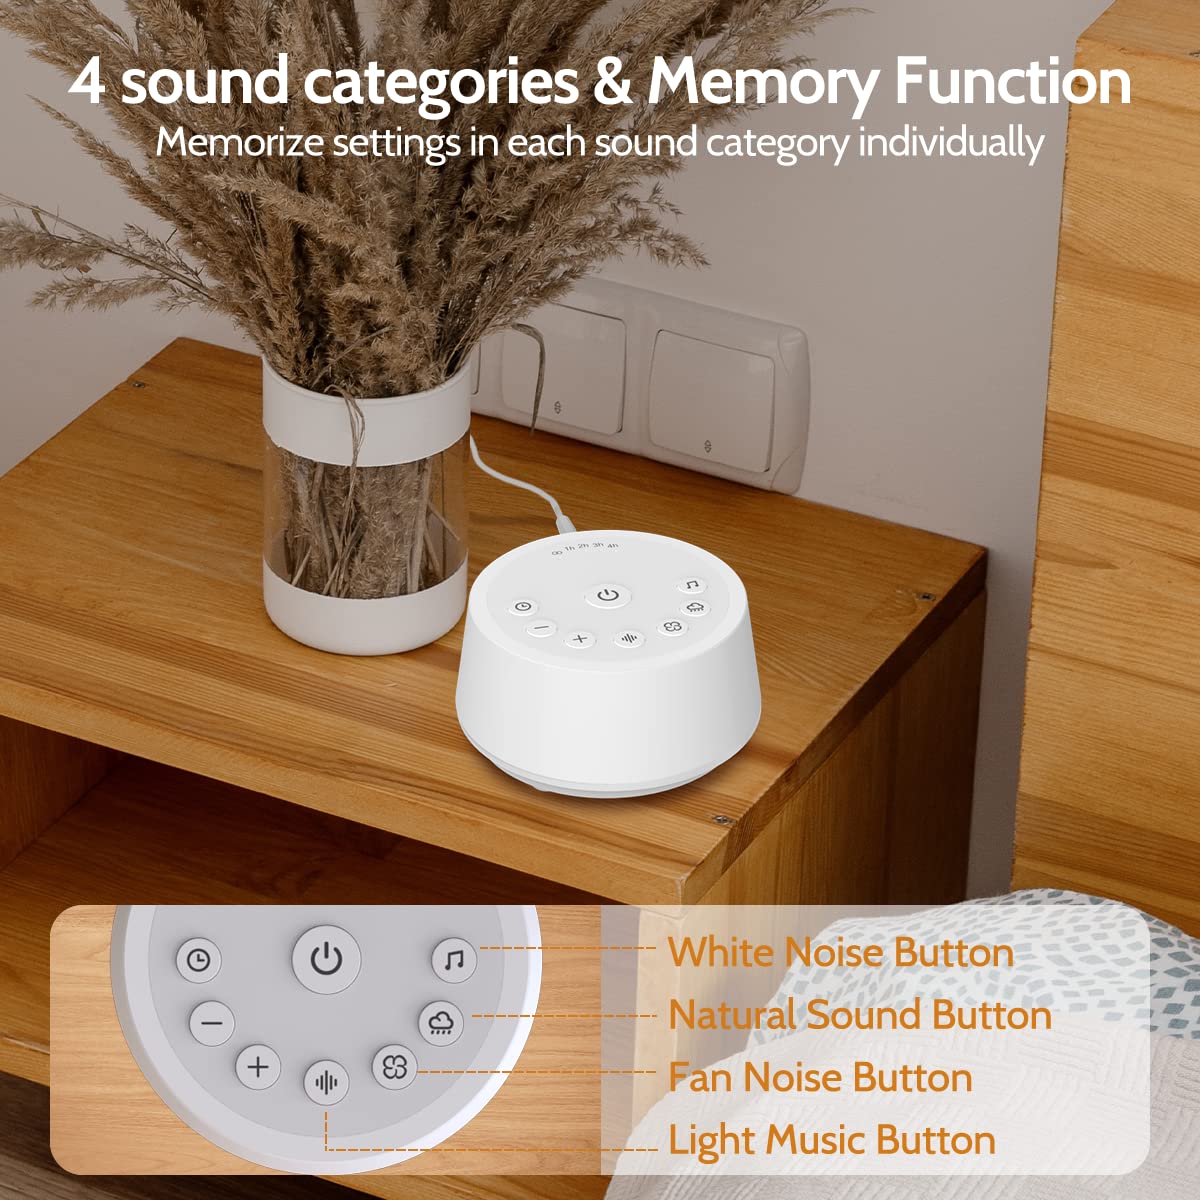 Color Noise Sound Machines Sleep White Noise Machine with 25 Soothing Sounds 32 Volume Levels 5 Timers and 4 Sound Categories and Memory Function for Kids Adults and Home